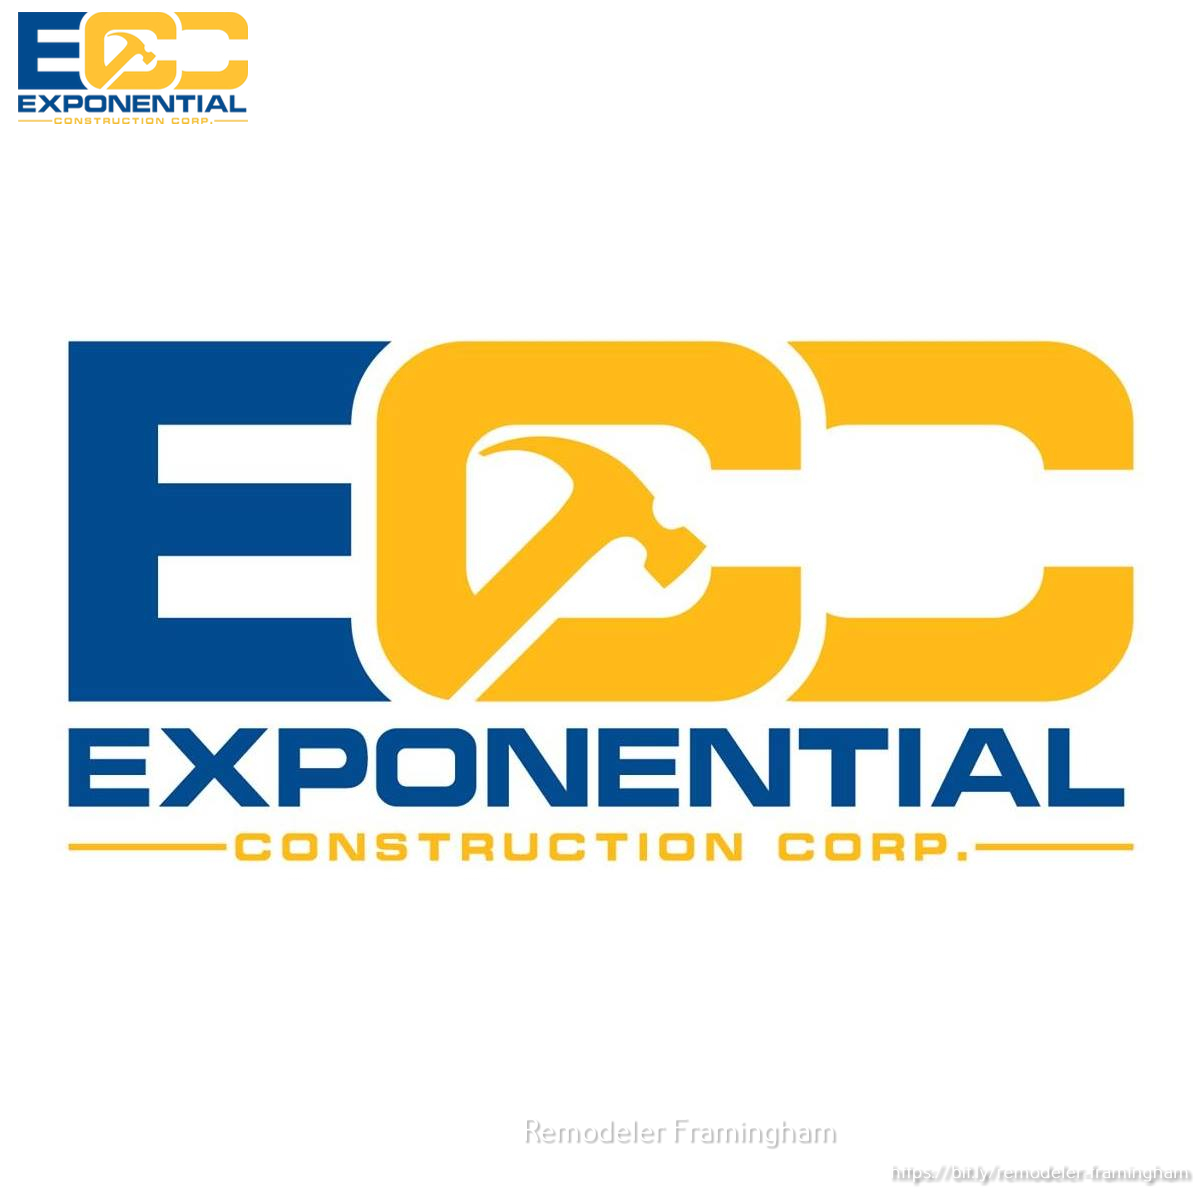 Exponential Construction Corp.